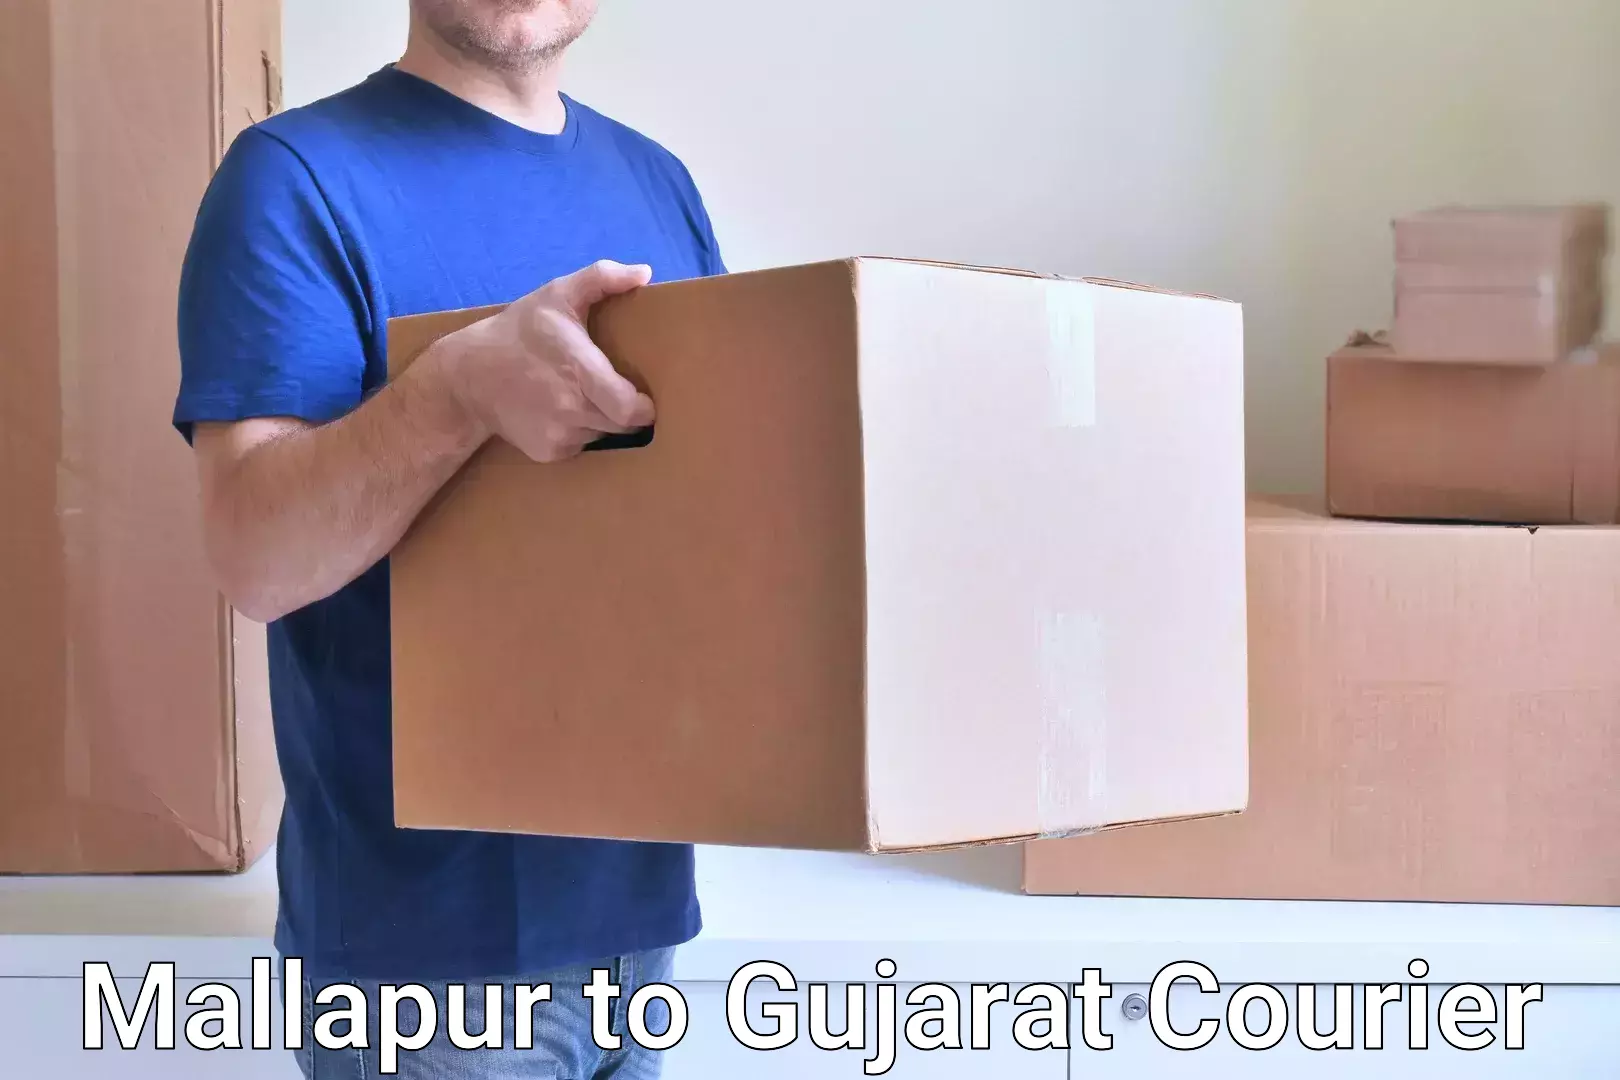 Courier services Mallapur to Anand